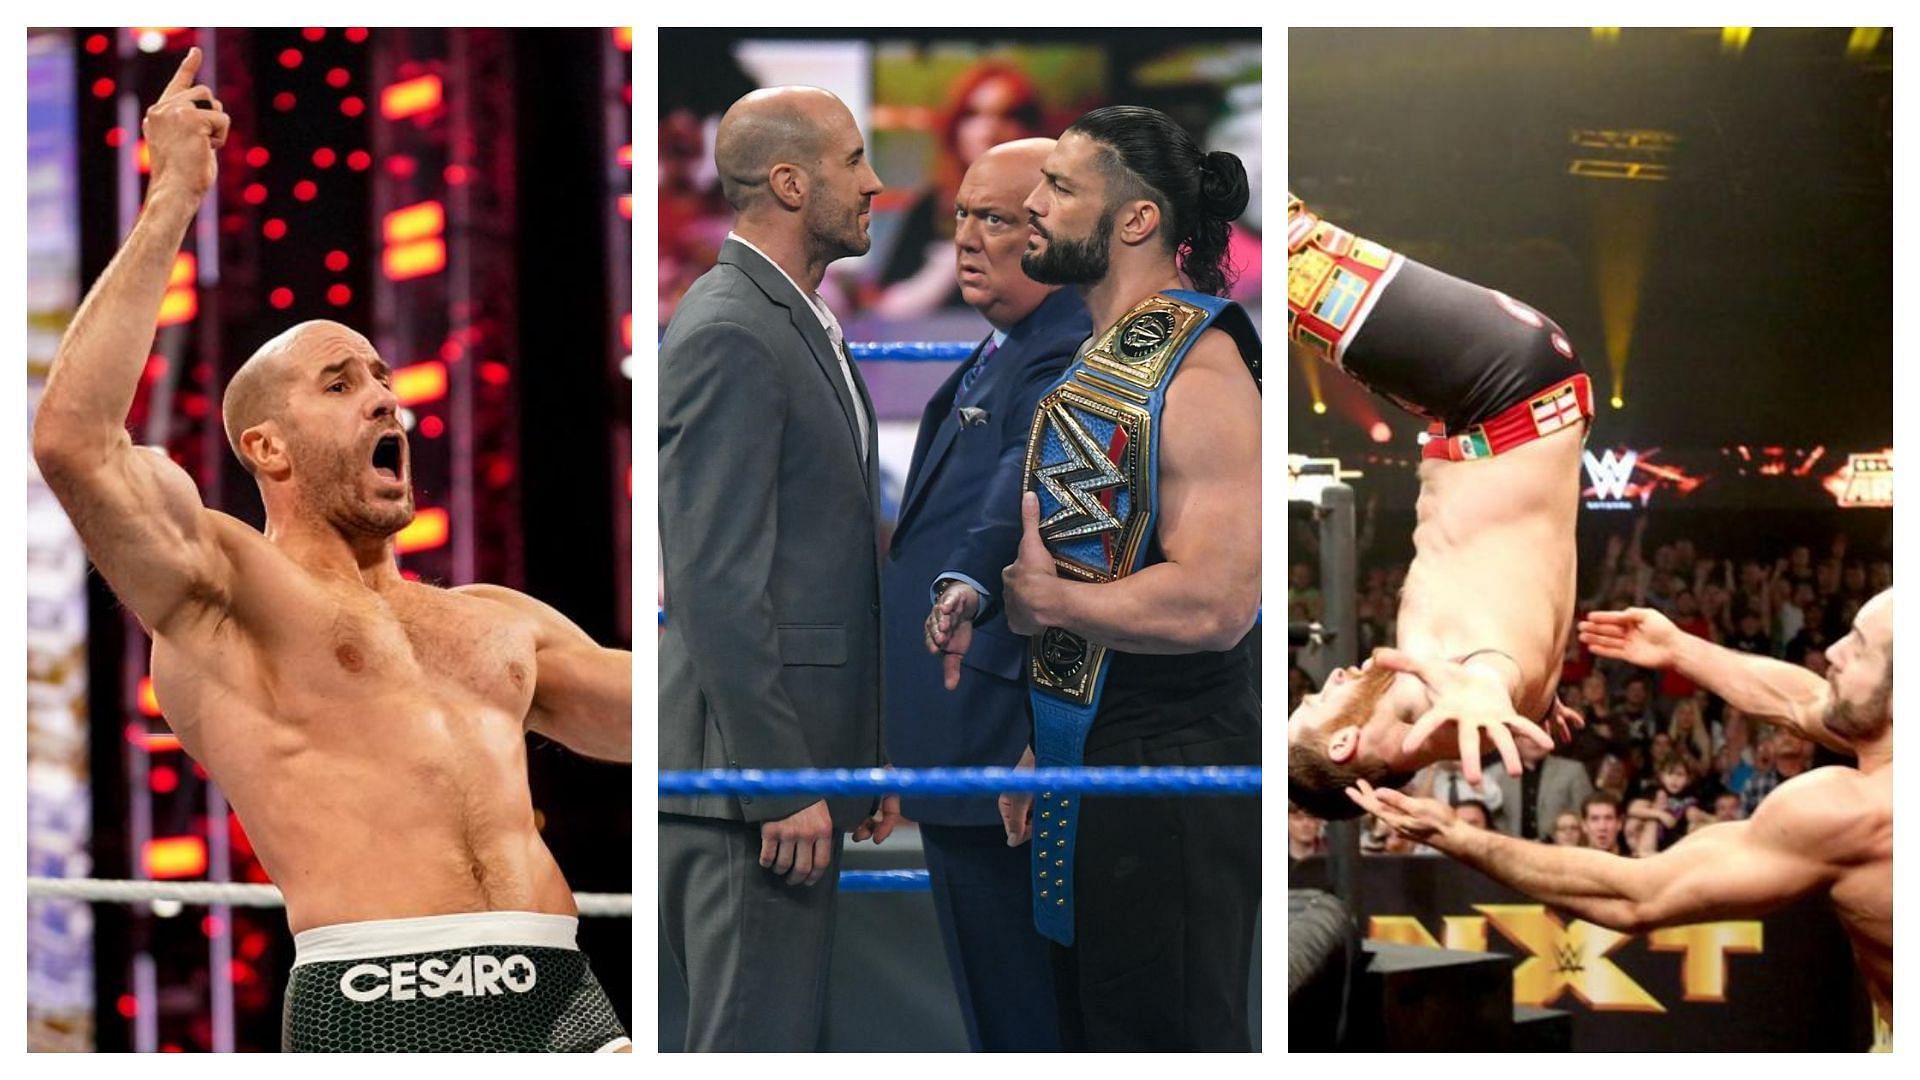 Cesaro had many great moments in WWE